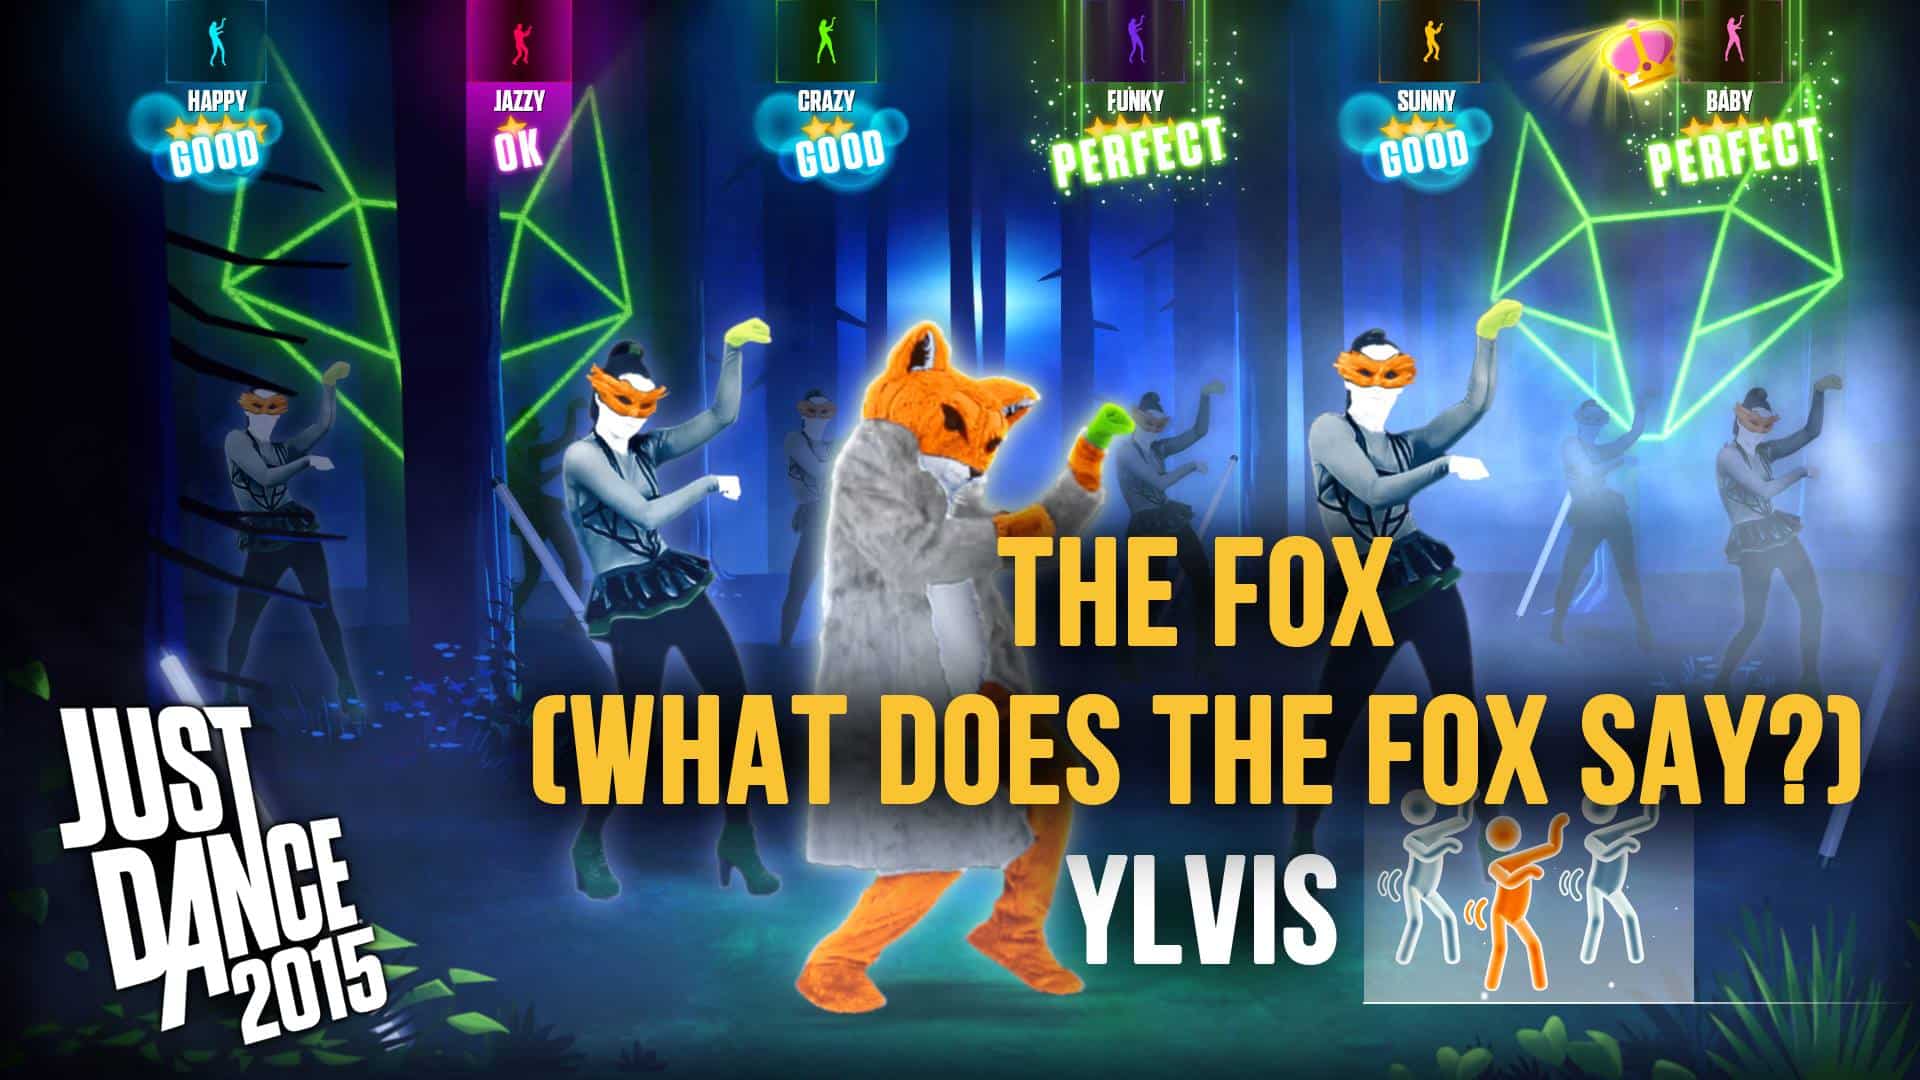 Just Dance 2015 The Fox What Does the Fox Say Ylvis Song Gameplay Screenshot